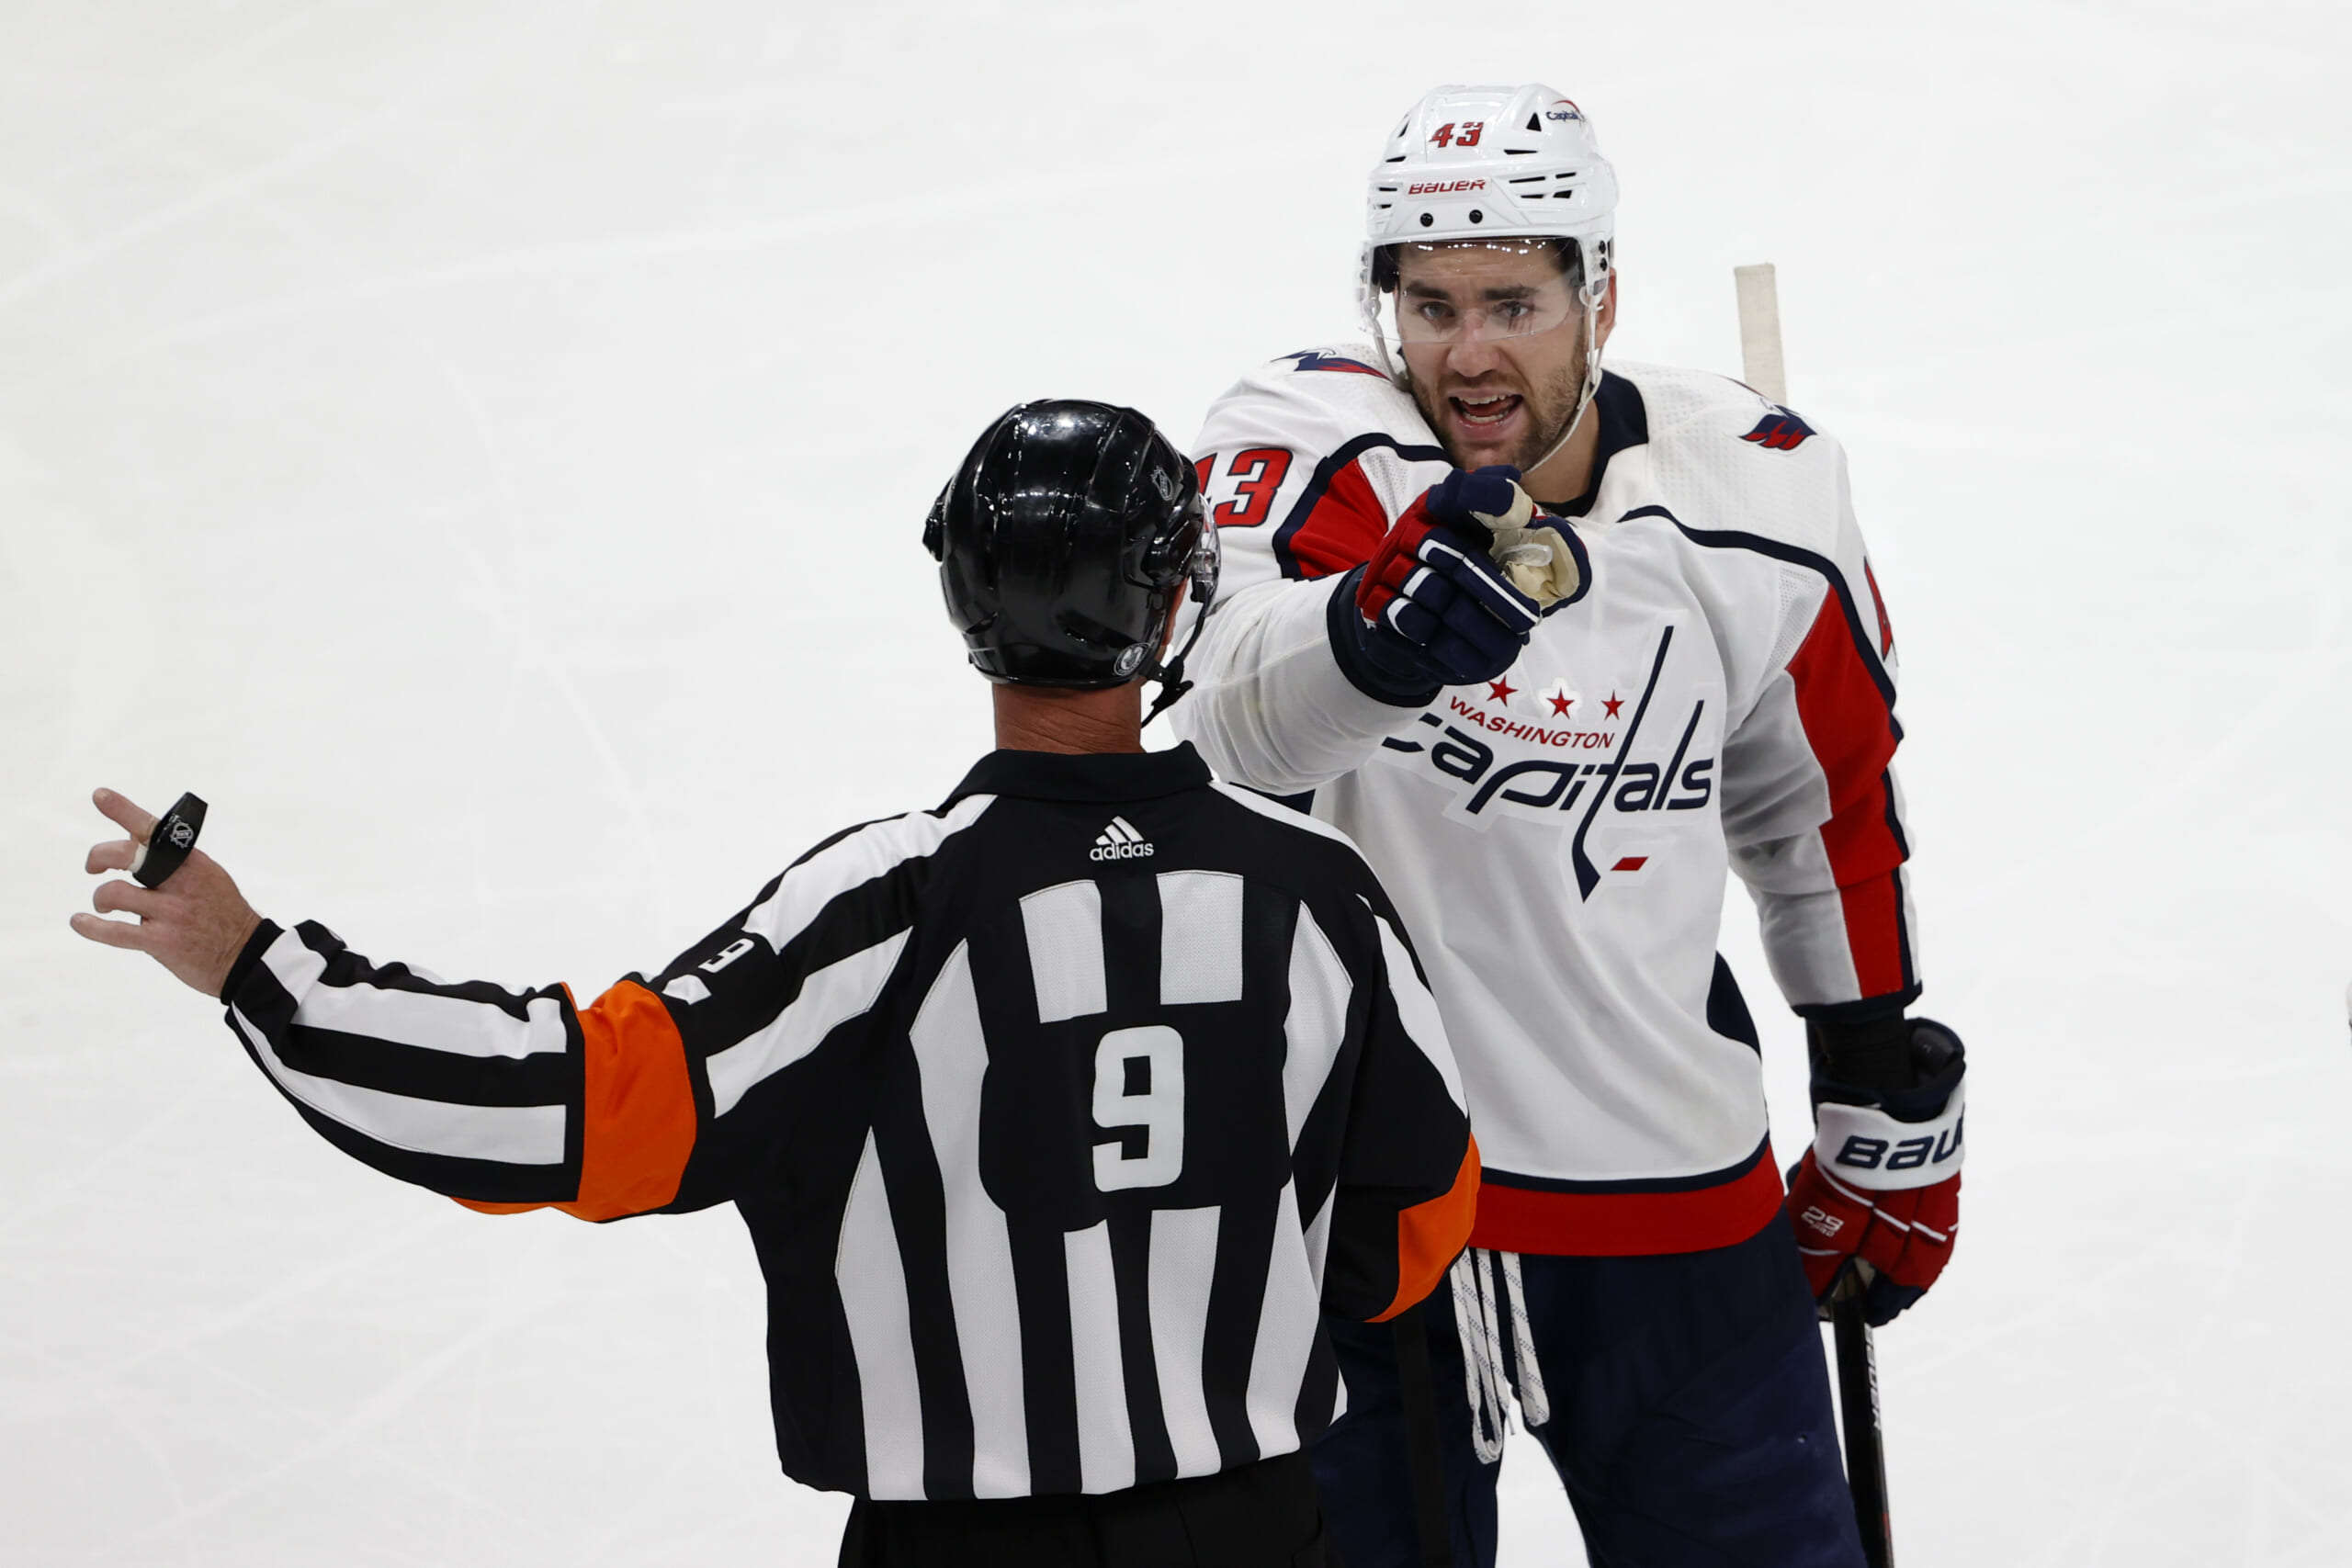 Tom Wilson is the most hated man in hockey. Can he change that